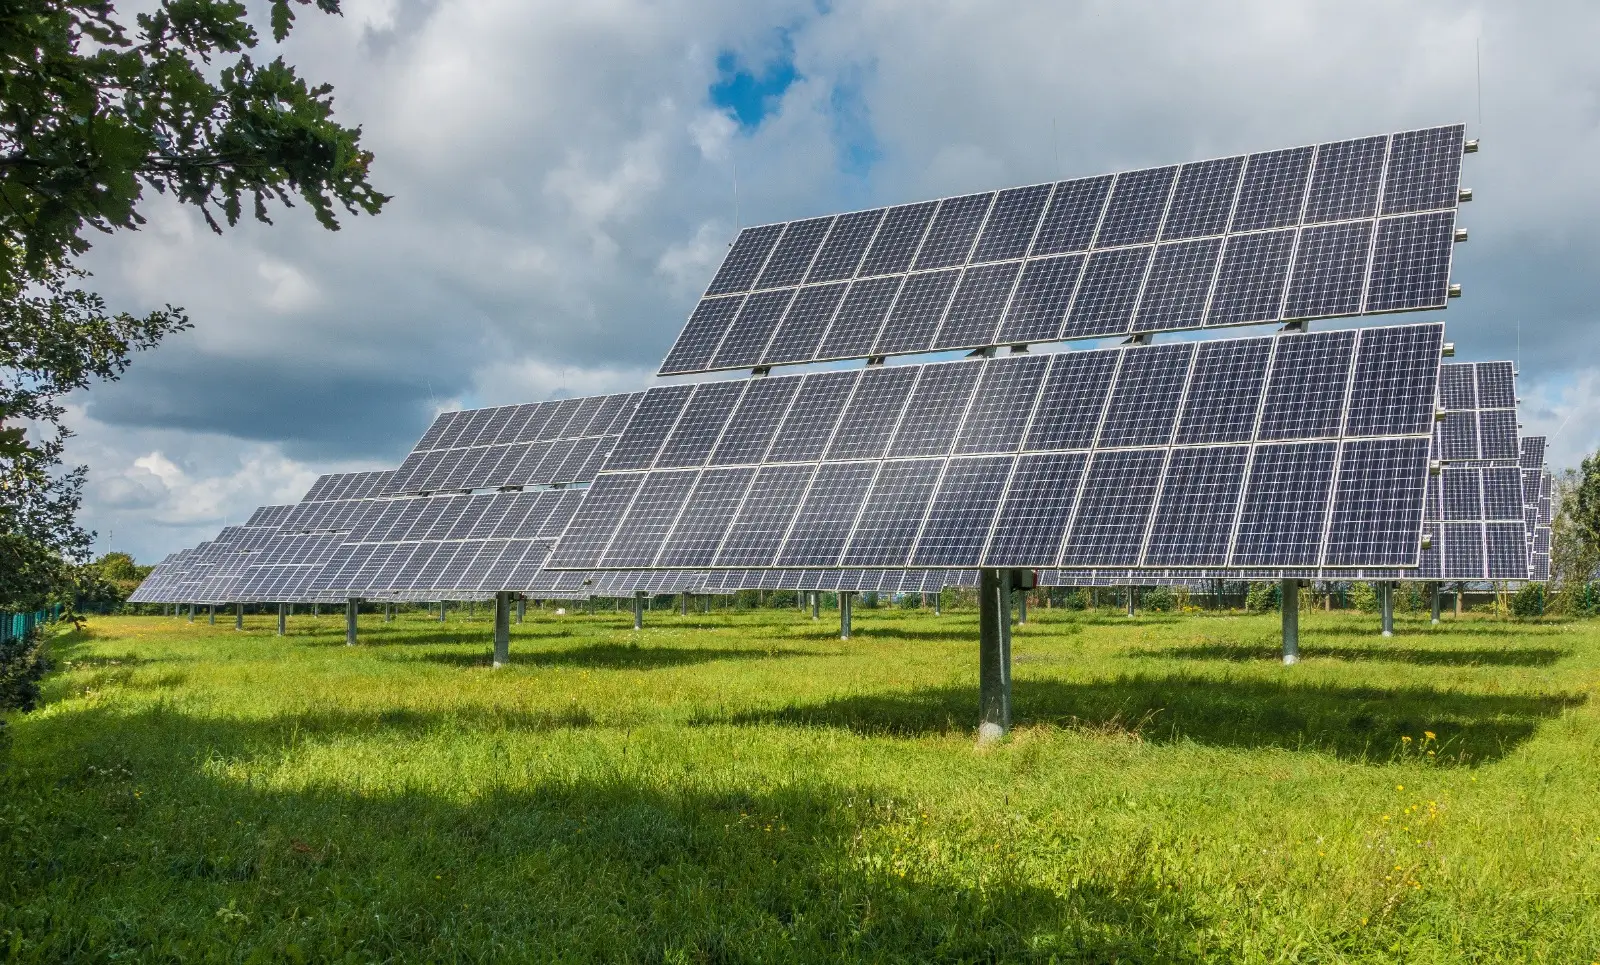 Solar Trackers 101: Are They the Key to Higher Energy Savings?